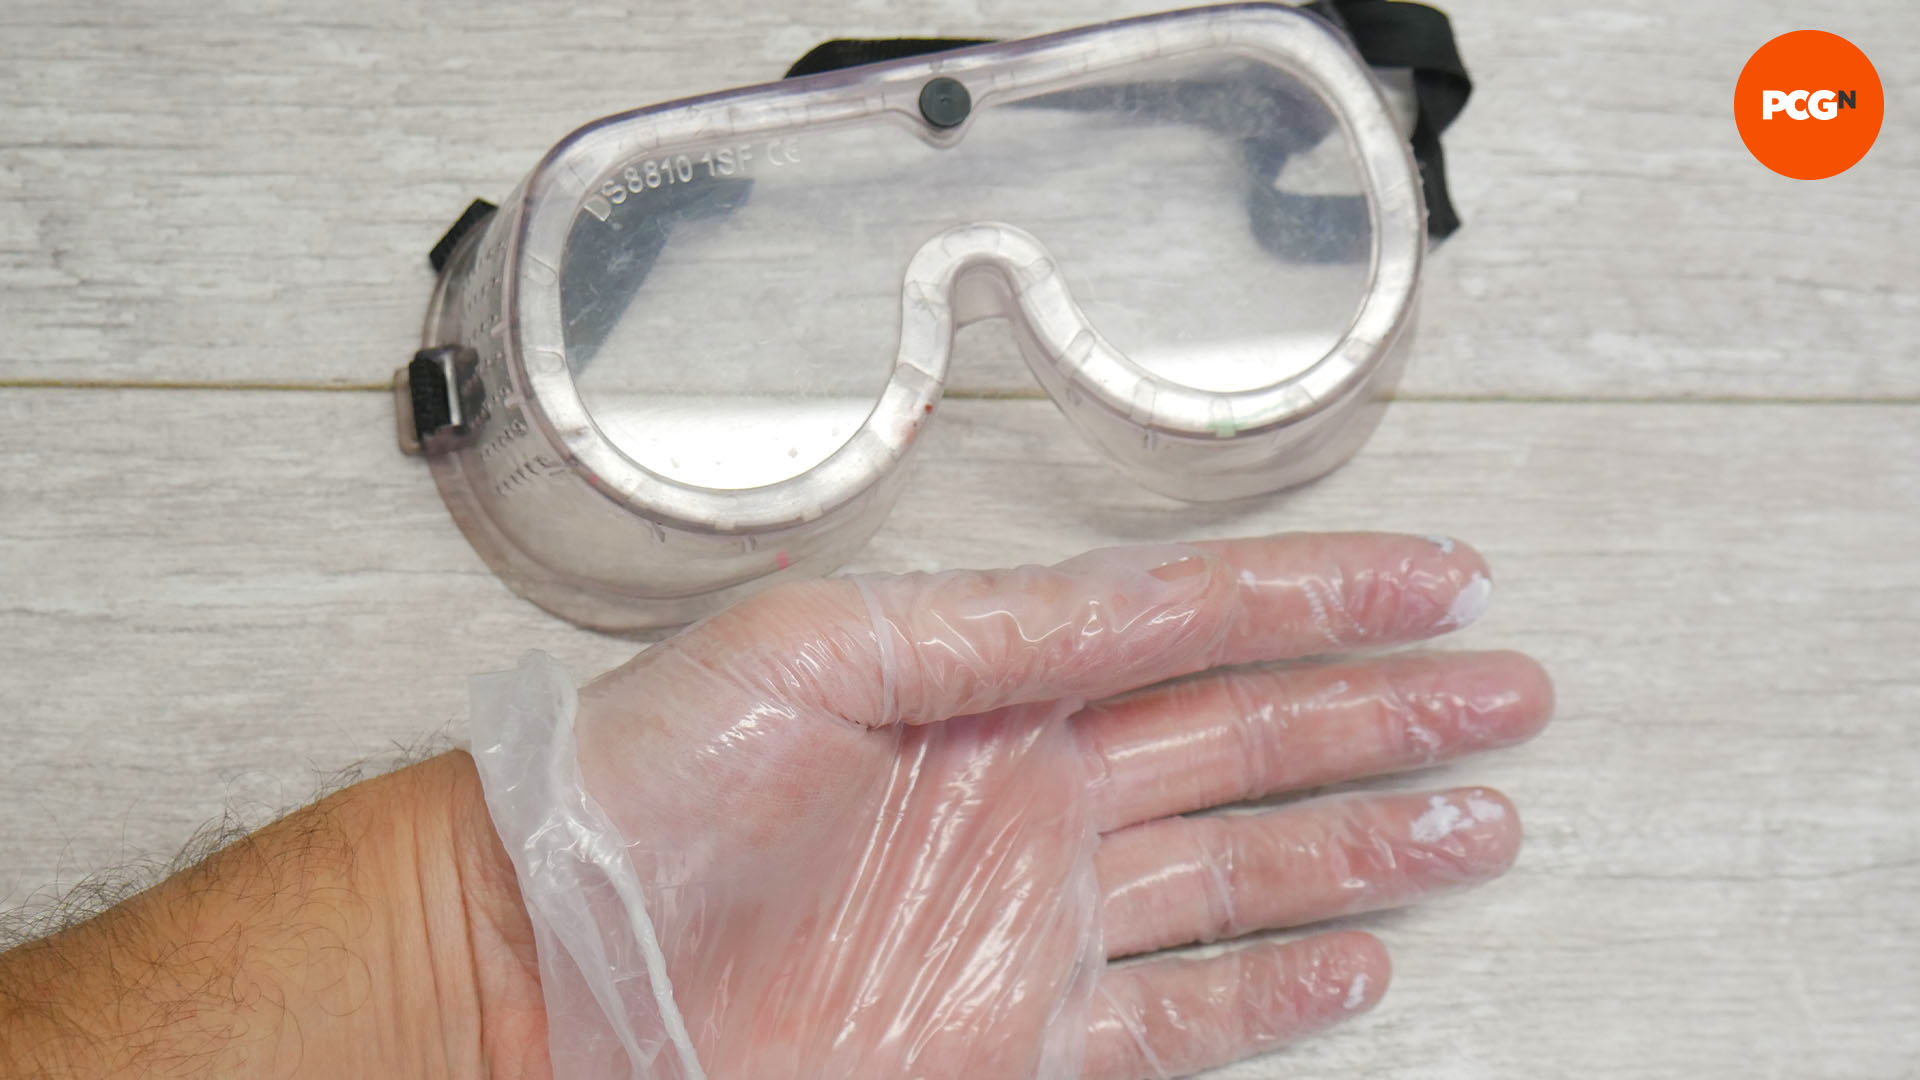 How to paint AIO cooler: Wear protective gloves and goggles